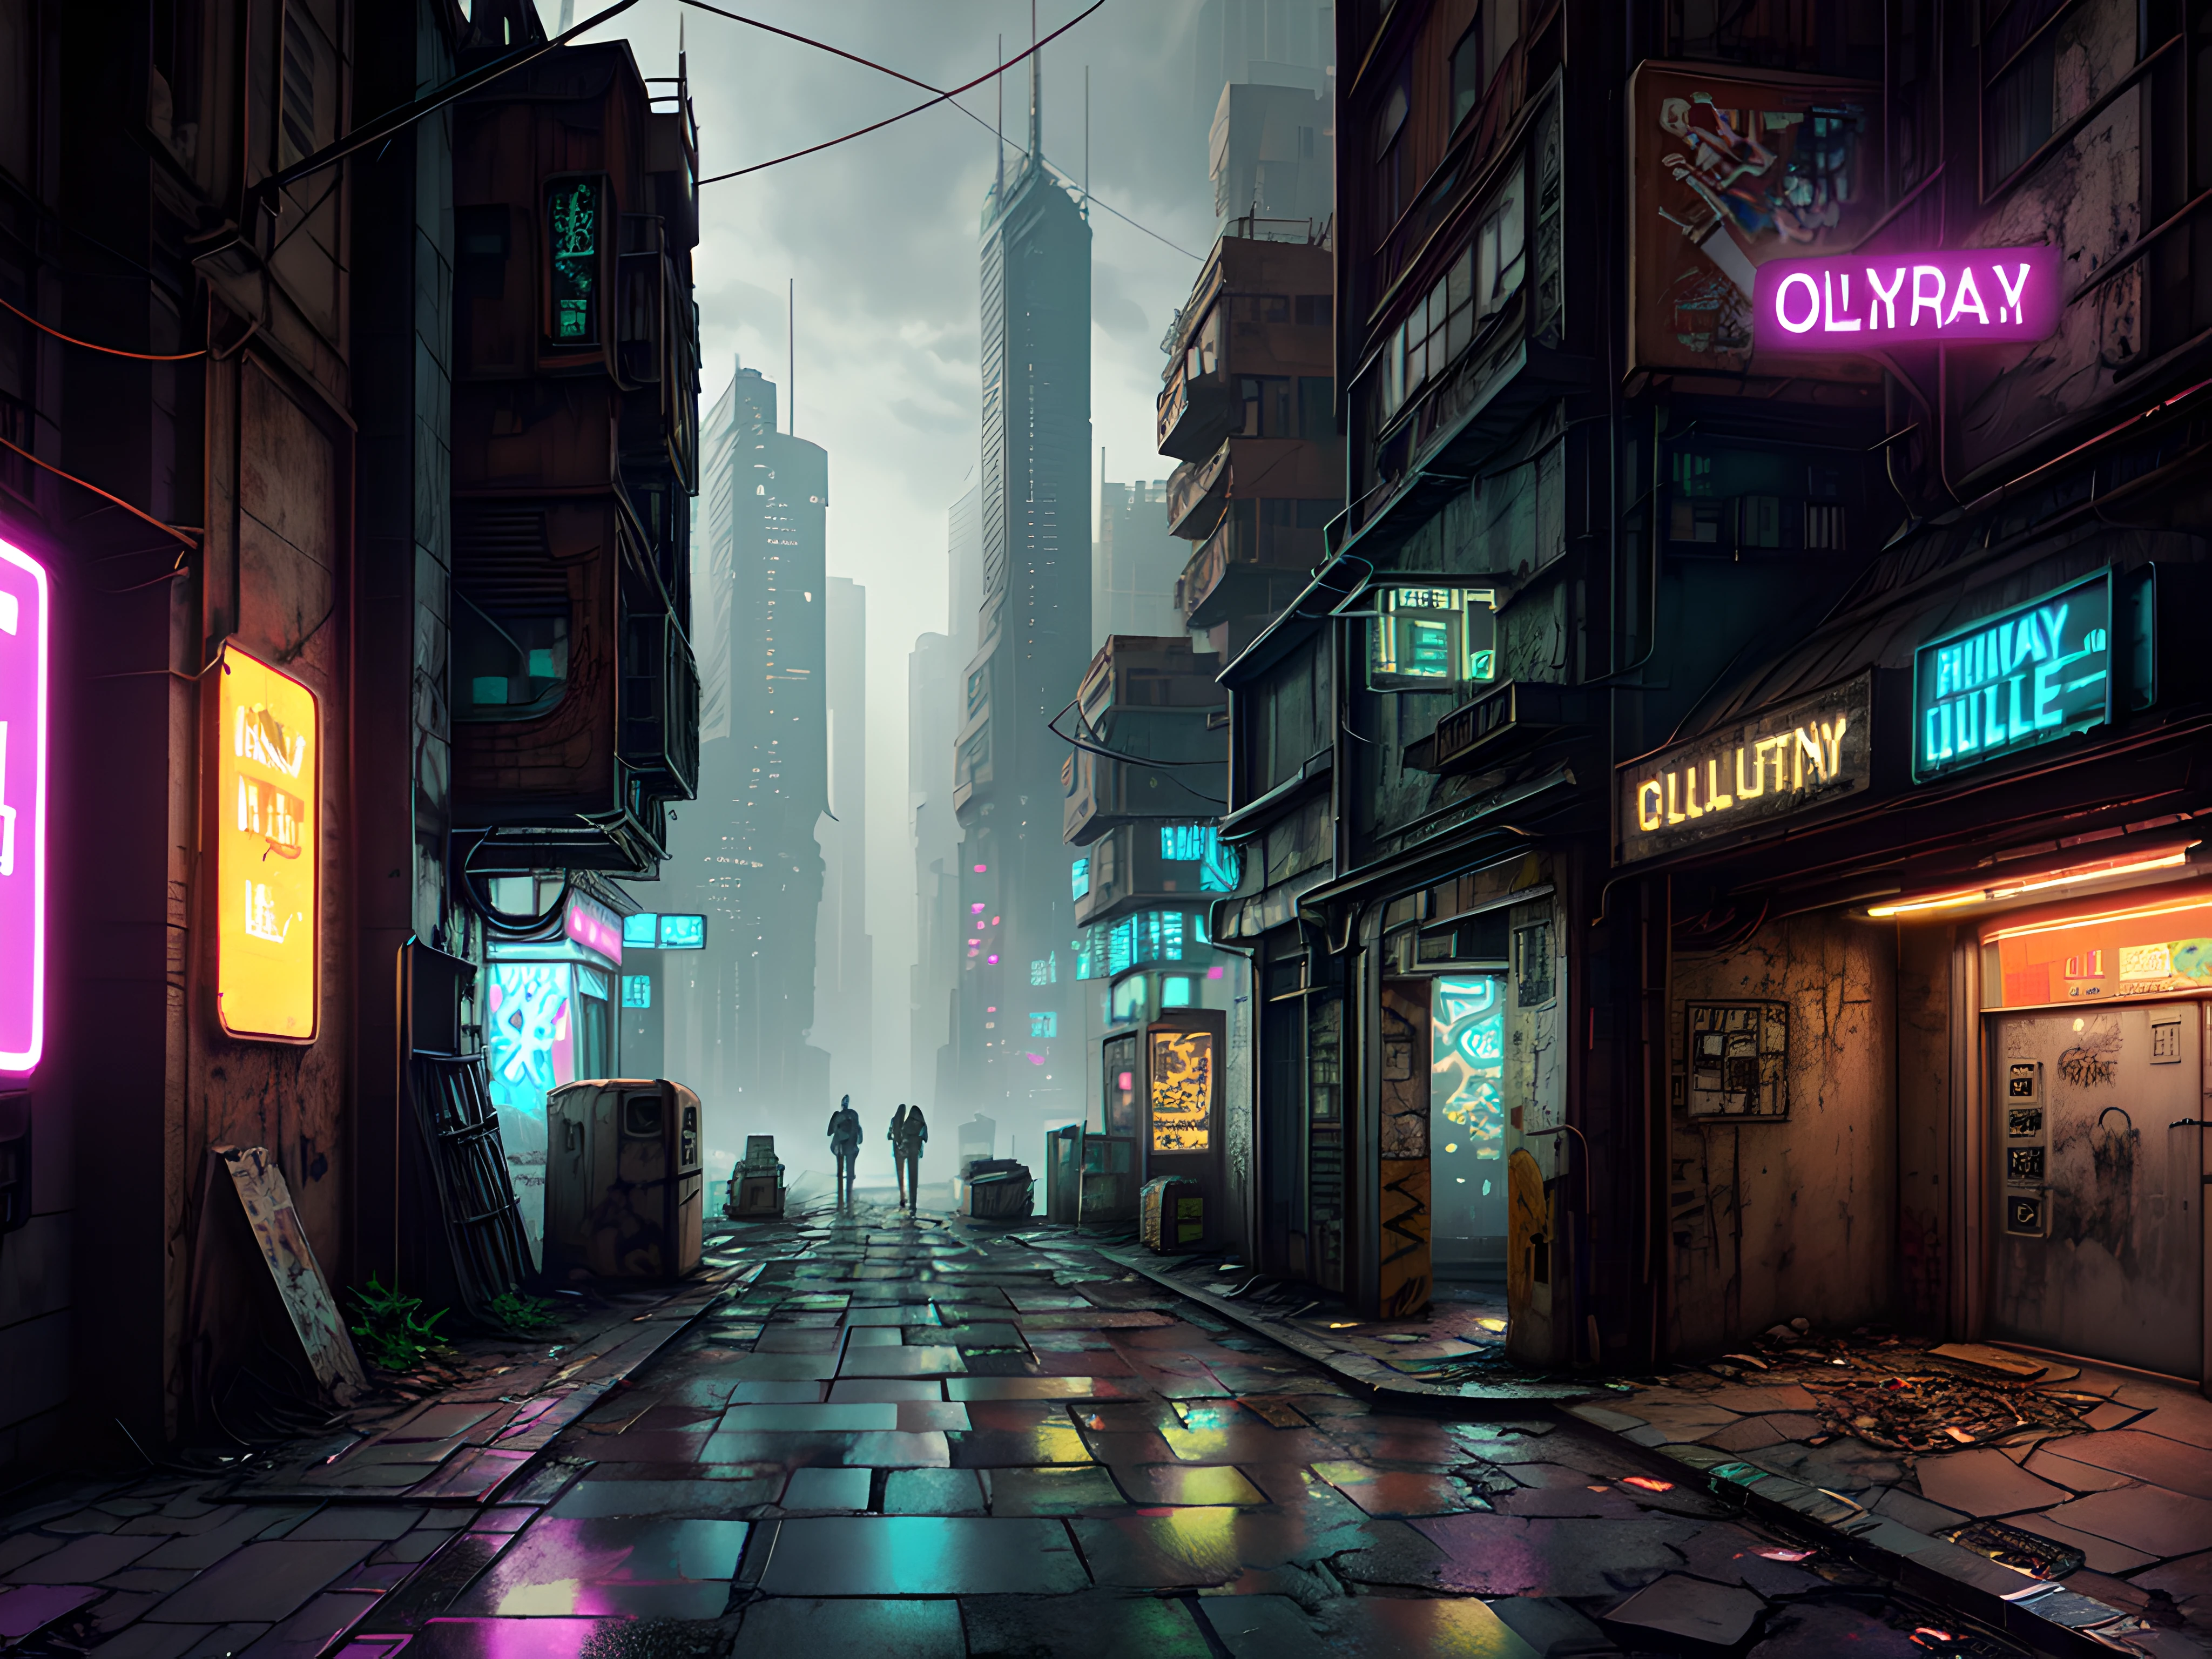 an aged, narrow alleyway in a futuristic city, framed by towering skyscrapers adorned with holographic advertisements; the alleyway is dimly lit, with rusted pipes and cracked pavement, contrasting the high-tech surroundings (Beeple-inspired:1.2) (grunge:1.1) (retro-futurism:1.1) (contrasts:1.2) (gritty ambiance) (vintage tones) (urban decay) (digital graffiti) (cyber-relics)